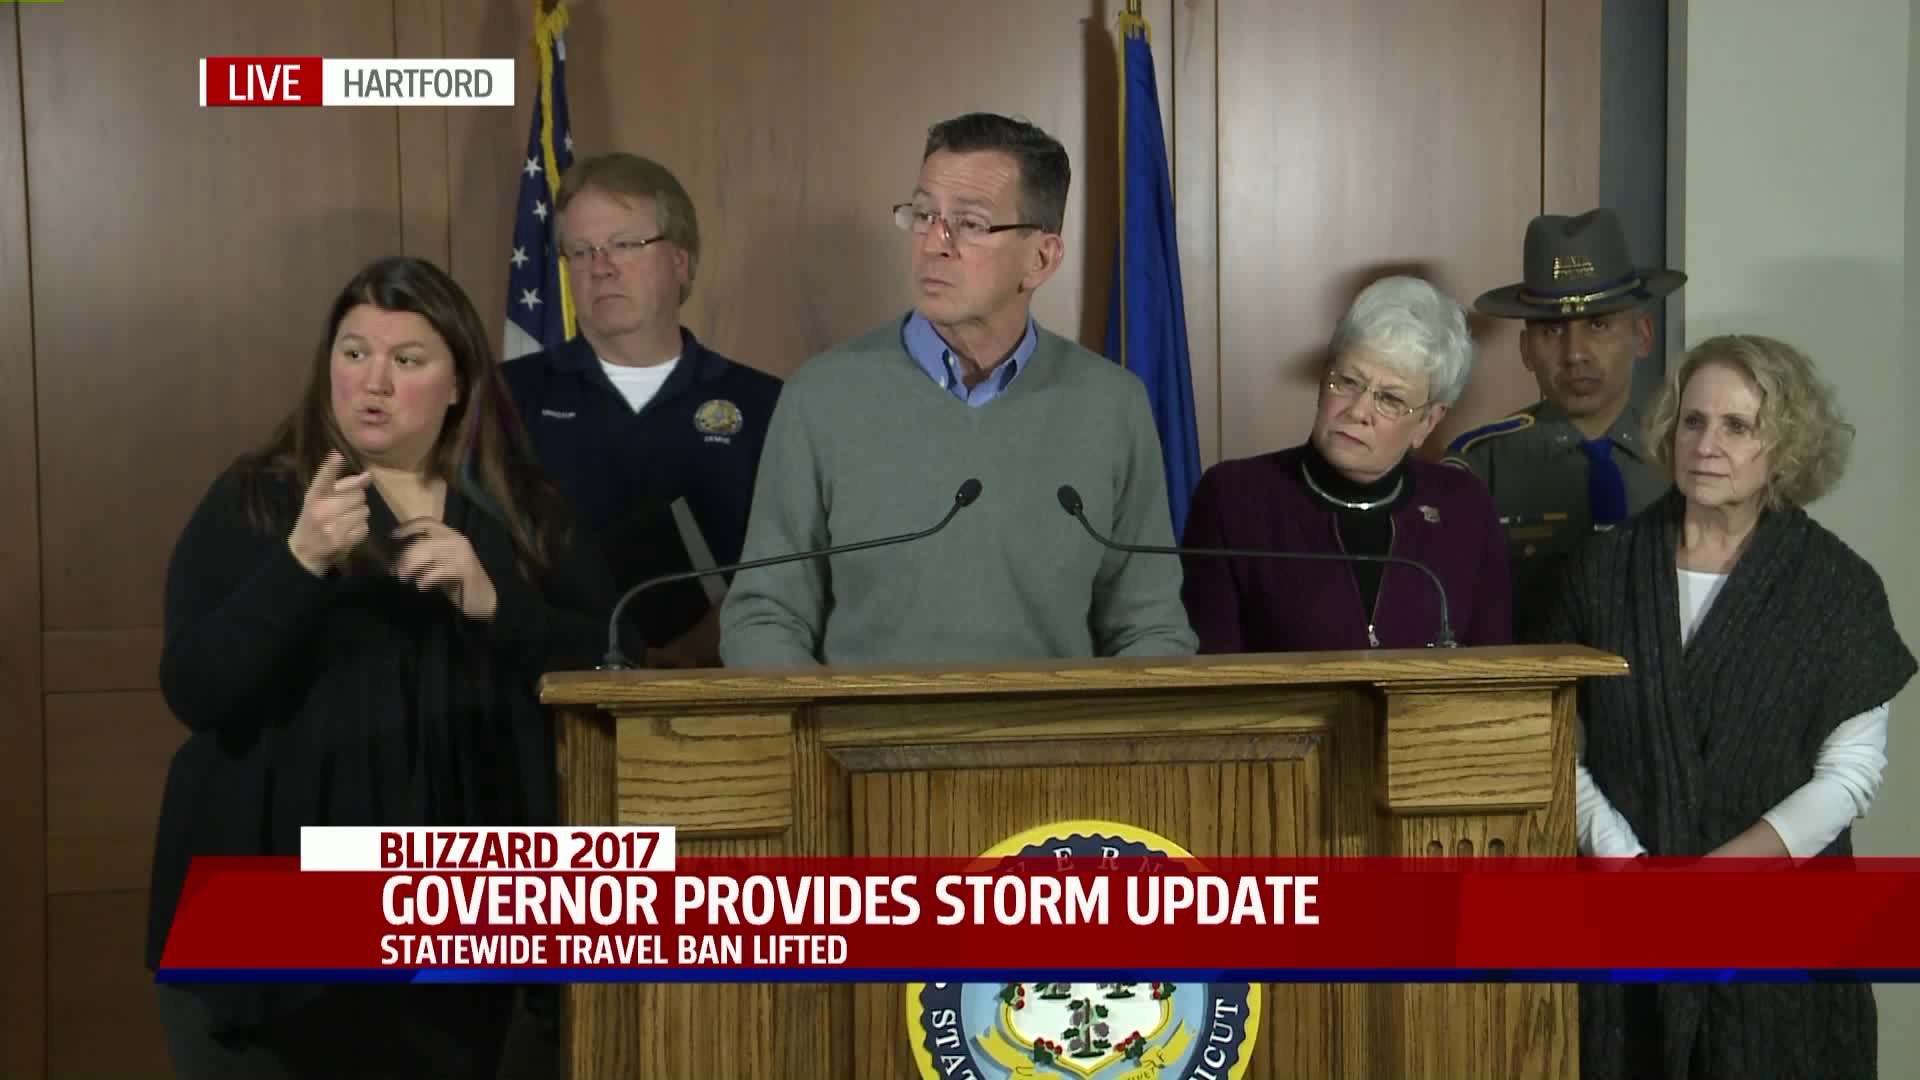 Governor Malloy gives a storm update